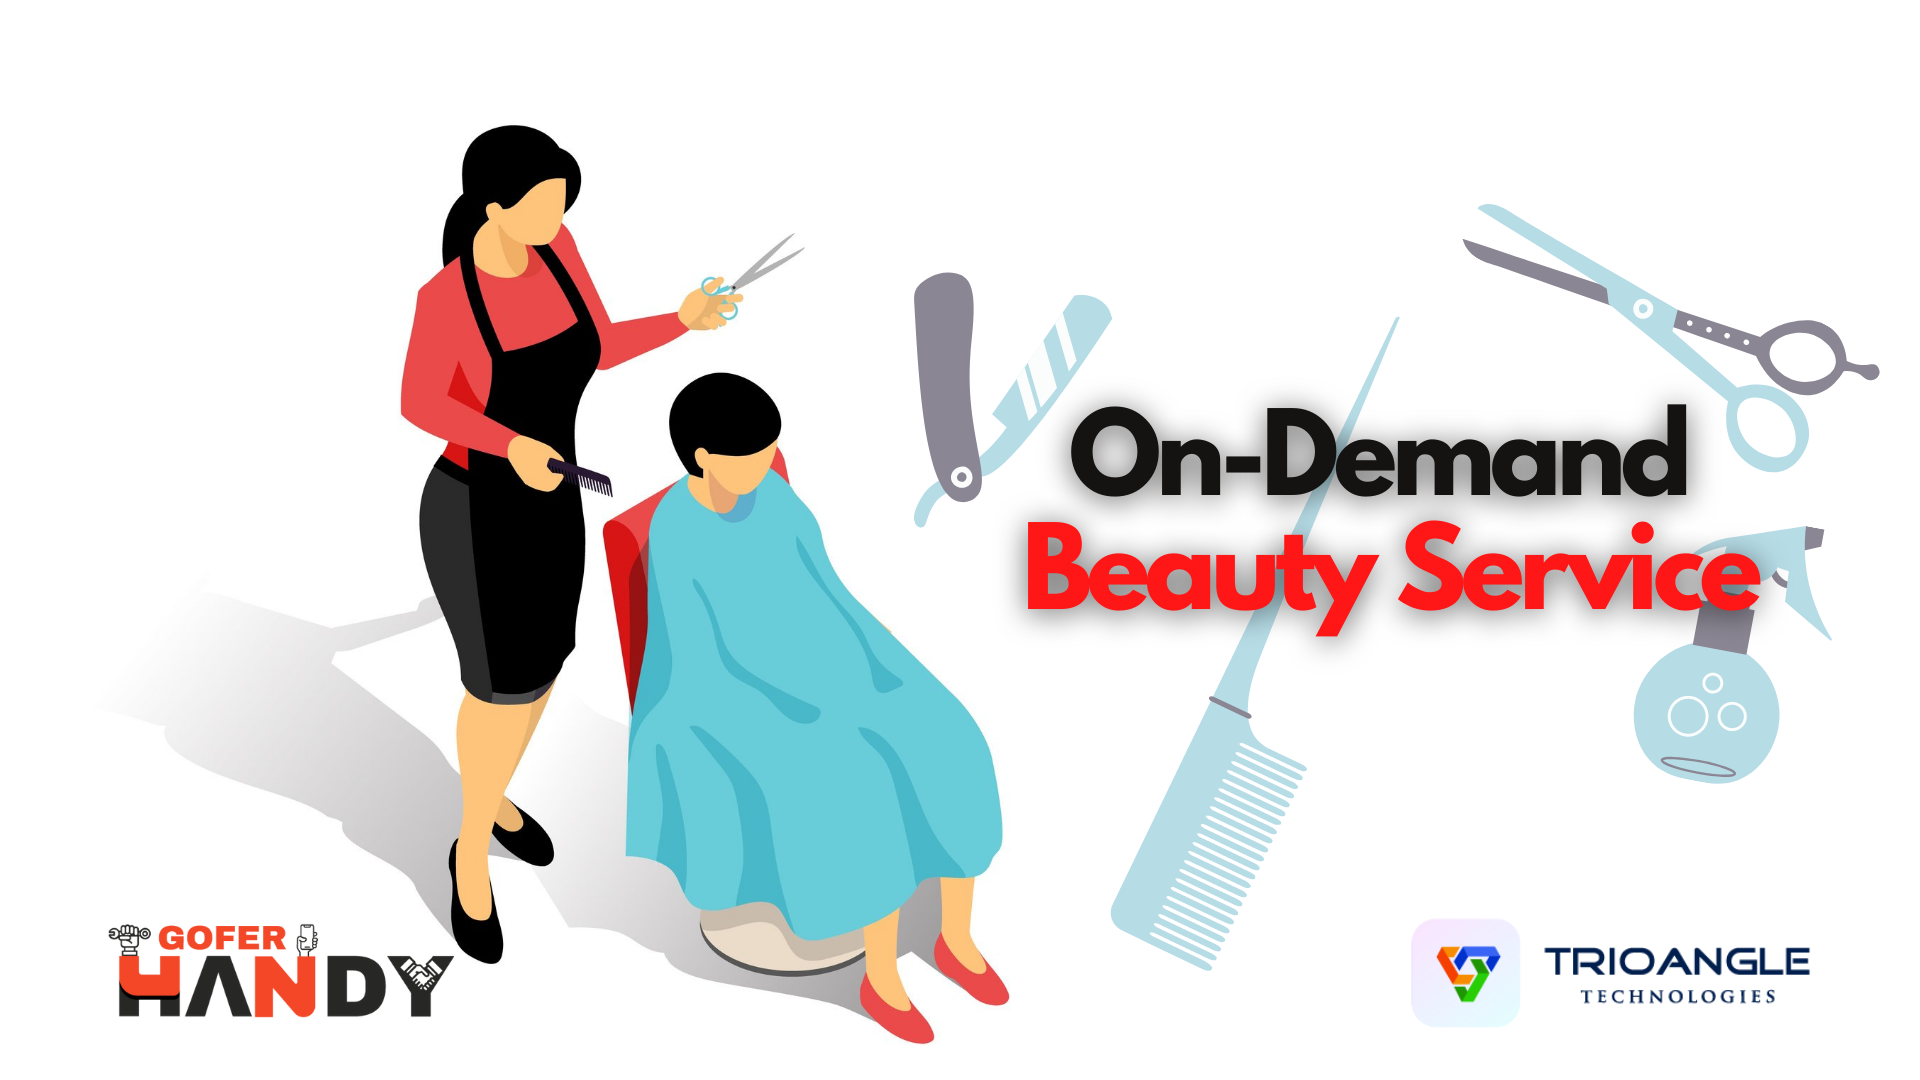 Article about On-demand Beauty Service 